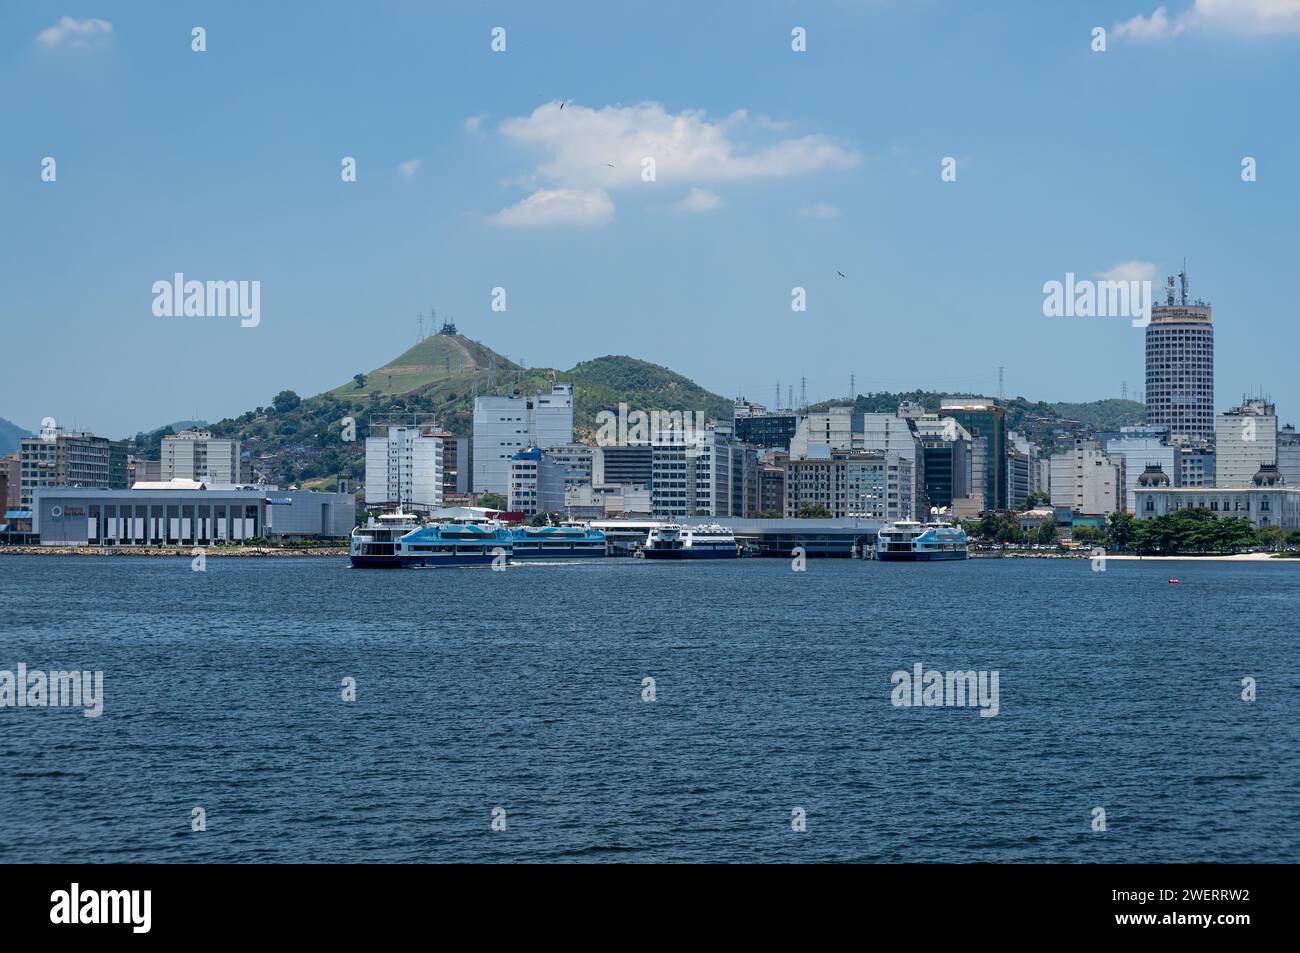 Distant view of Niteroi's Centro district coastline waterfront buildings as saw from Guanabara bay blue waters under summer afternoon clear blue sky. Stock Photo